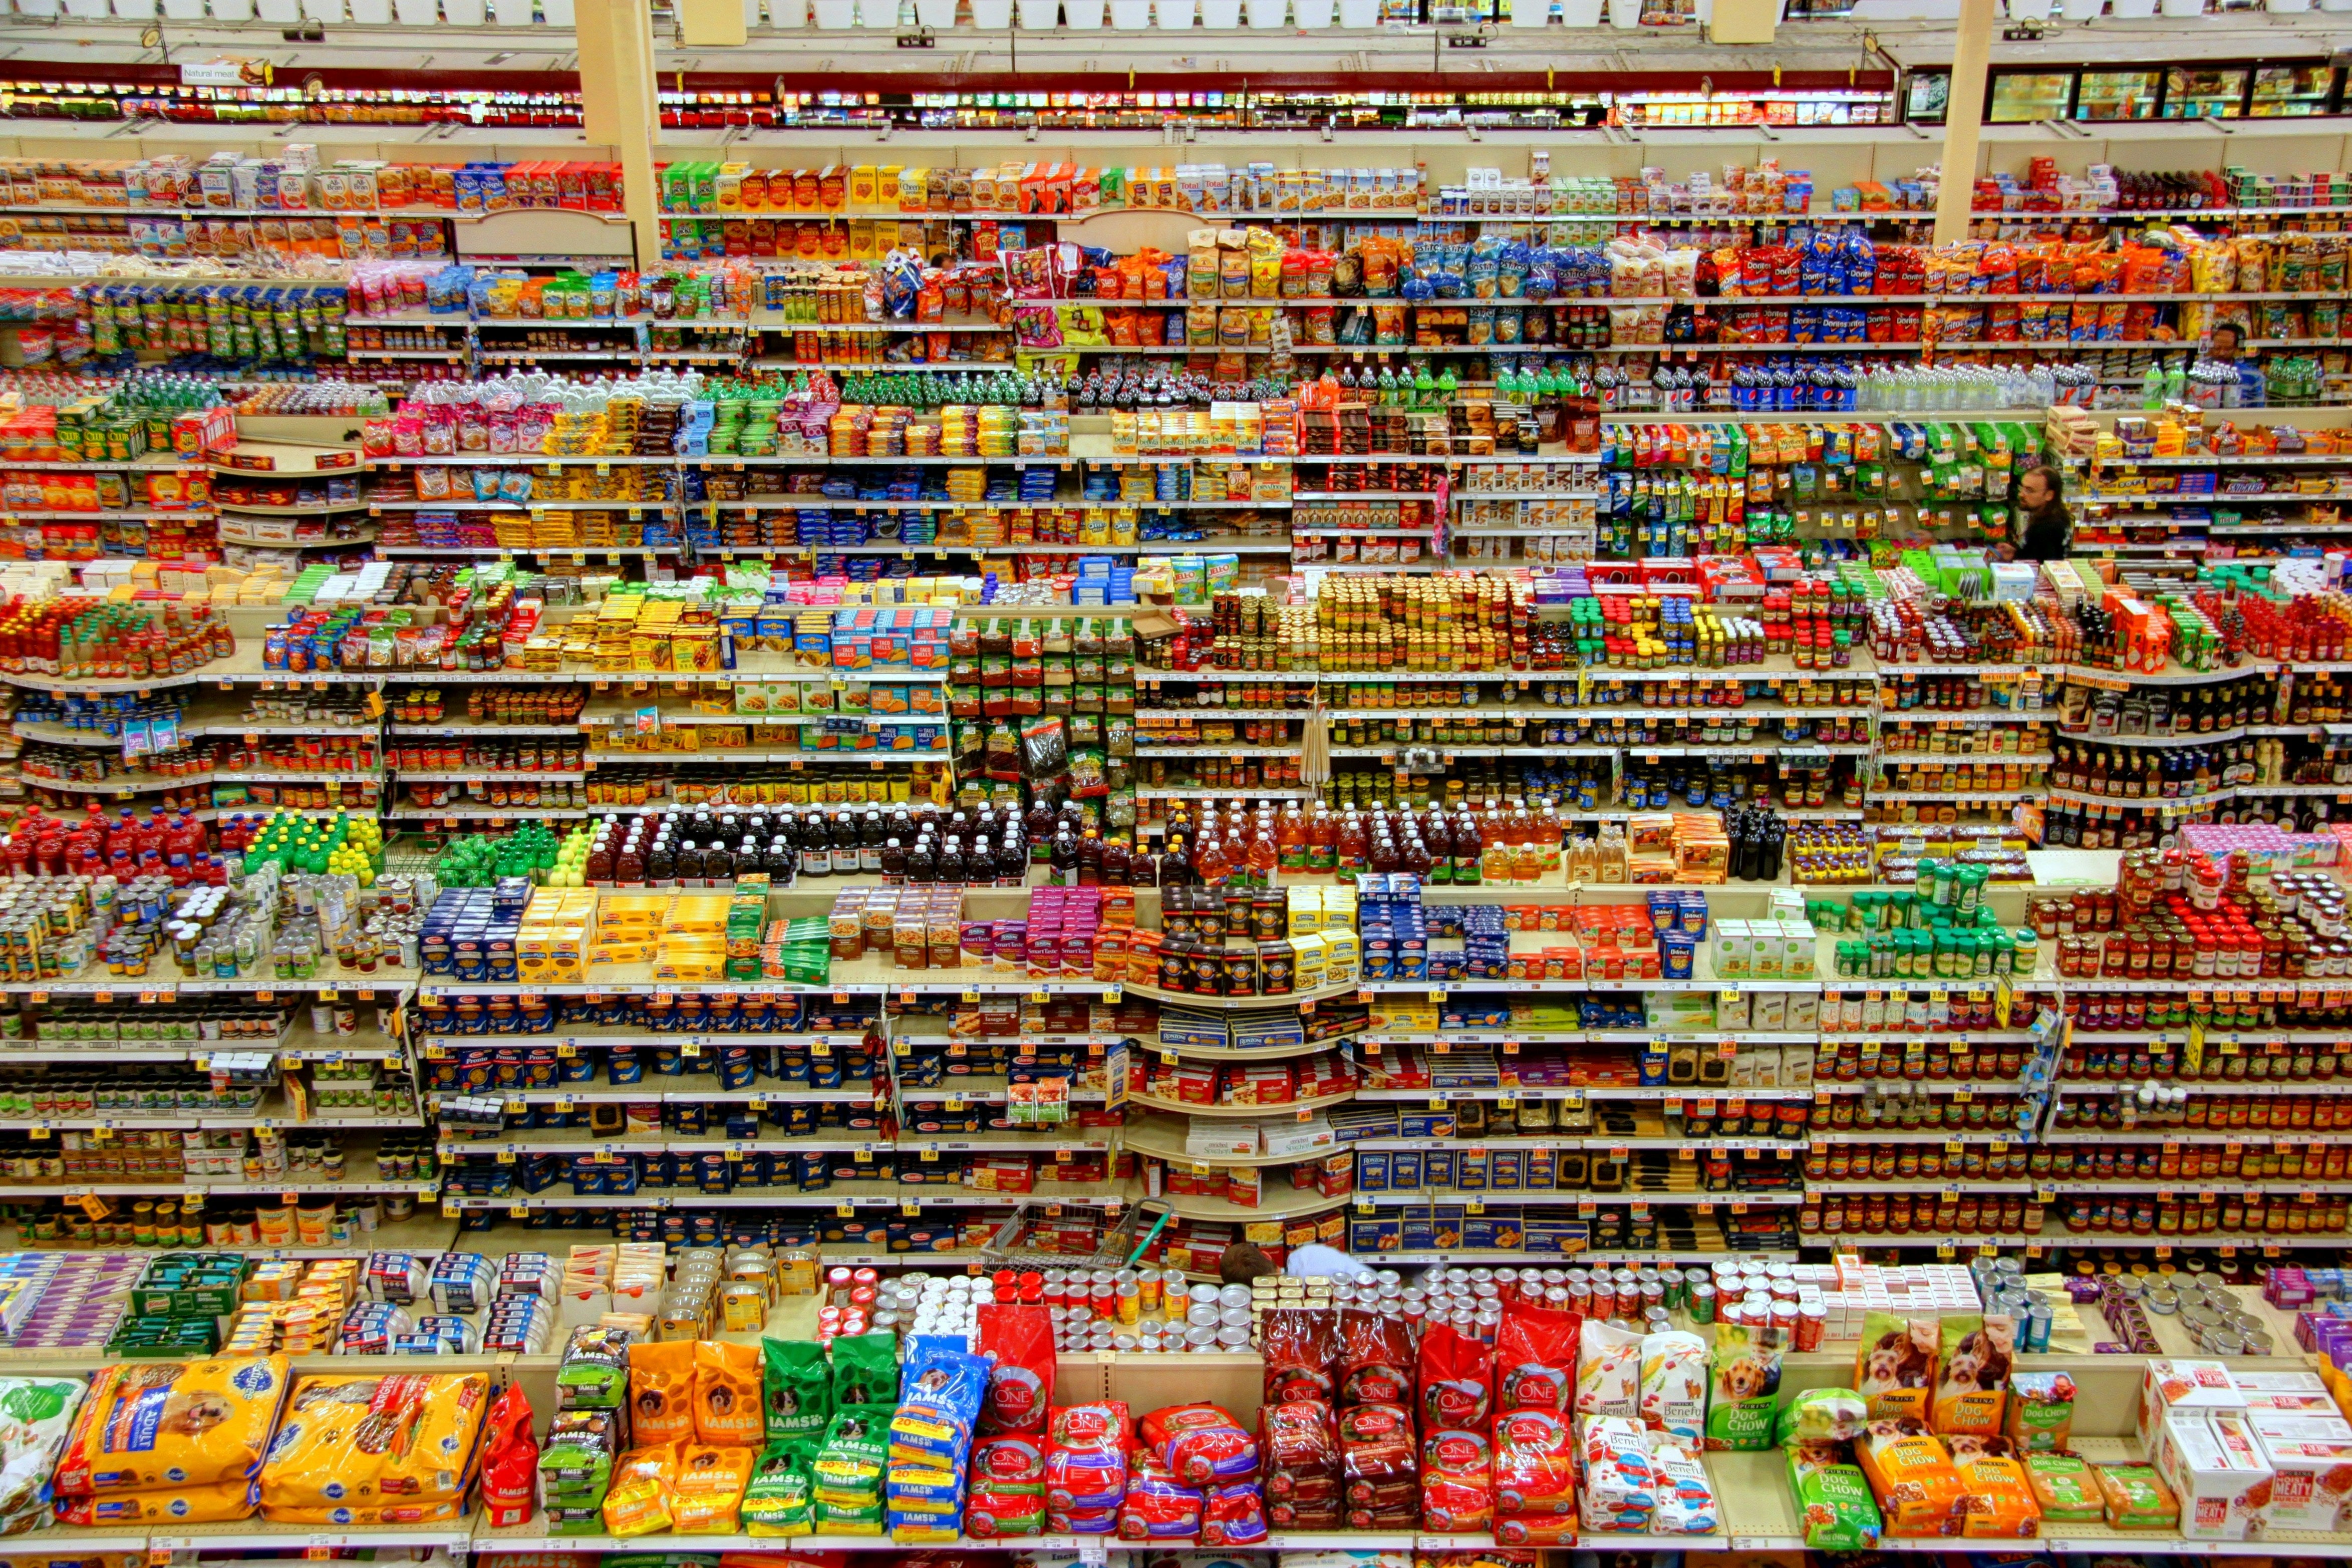 Various packaged foods in a grocery store